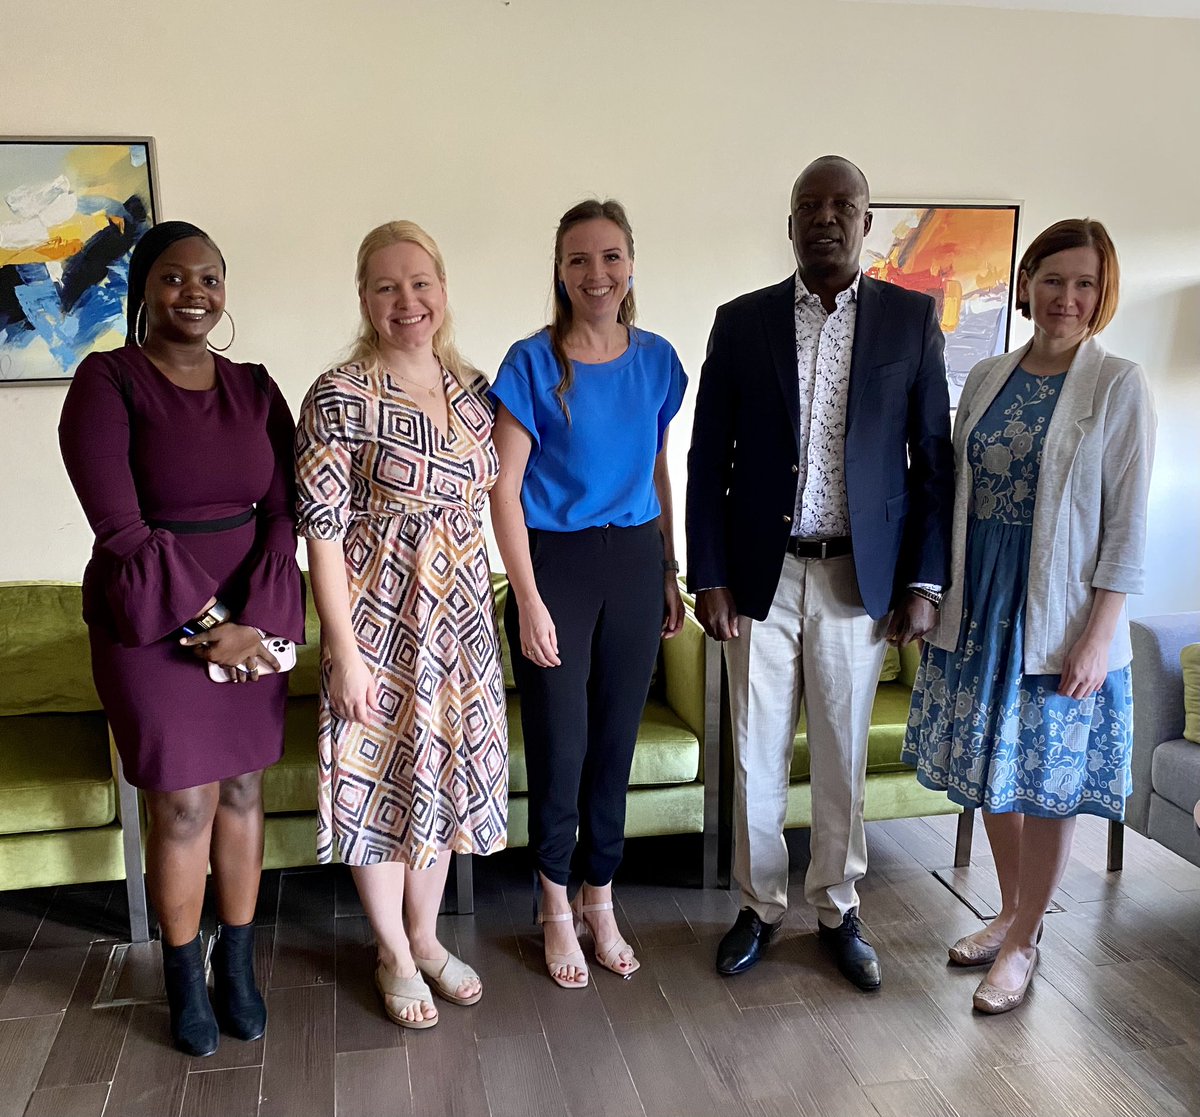 Thanks @HonJKMelly for sharing your vision for #education in #Kenya. Looking fwd to building synergies b/w our 2 countries with @EstDevEstonia & @haridusmin Karibu Estonia!